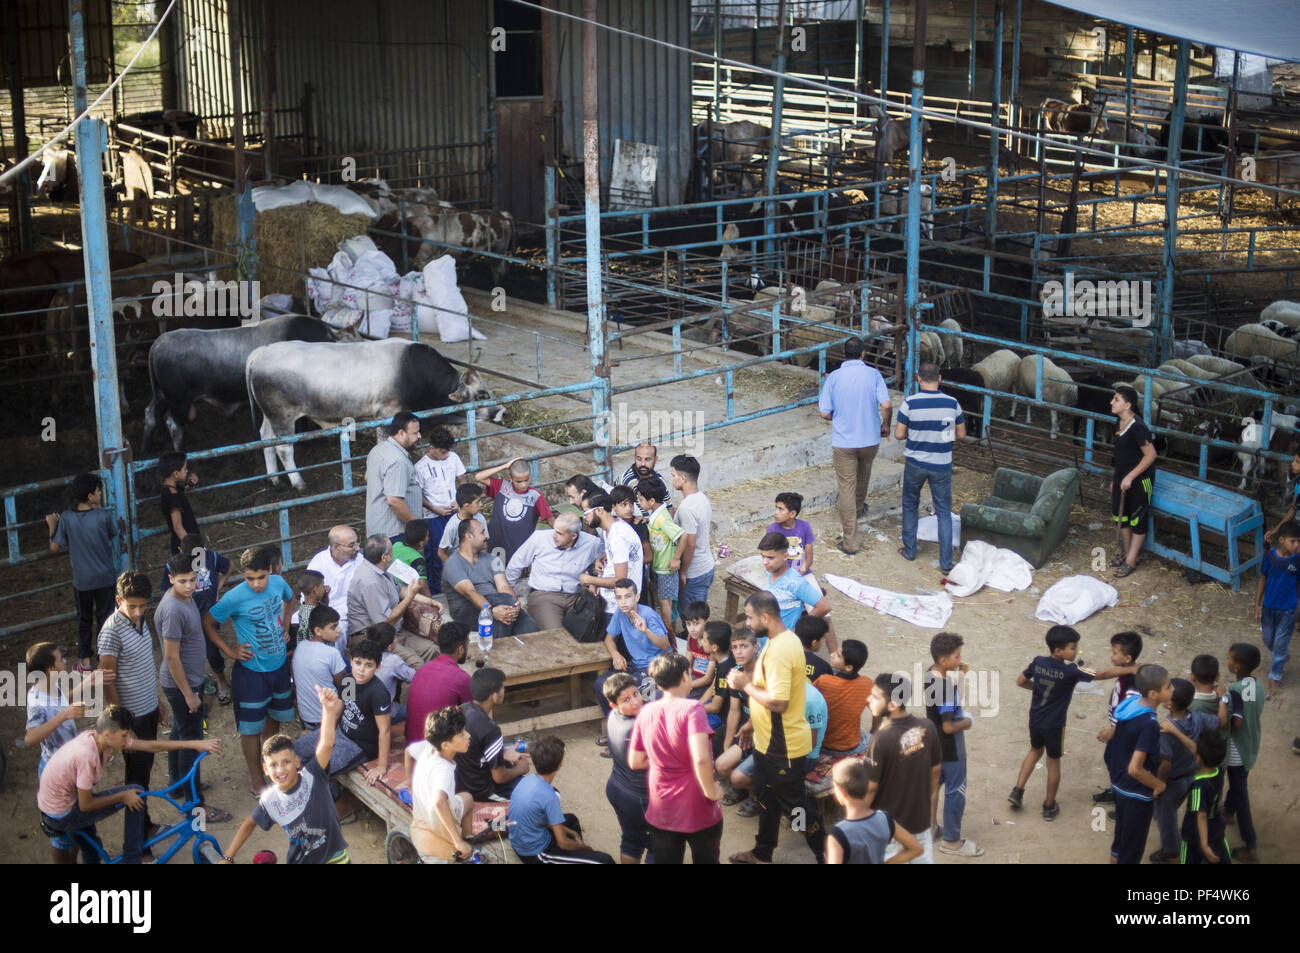 Gaza City, The Gaza Strip, Gaza. 18th Aug, 2018. People seen at the cattle shop for purchasing their cattles.Palestinians gather in a cattle shop to purchase cattles to be sacrificed. before Eid al-Adha in the east of Jabalya refugee camp. Eid al-Adha (Festival of Sacrifice) is celebrated throughout the Islamic world as the commemoration of Abraham's will to sacrifice his son for God, cows, camels, goats and sheep are traditionally slaughtered on the Holy Day. Credit: Mahmoud Issa/SOPA Images/ZUMA Wire/Alamy Live News Stock Photo